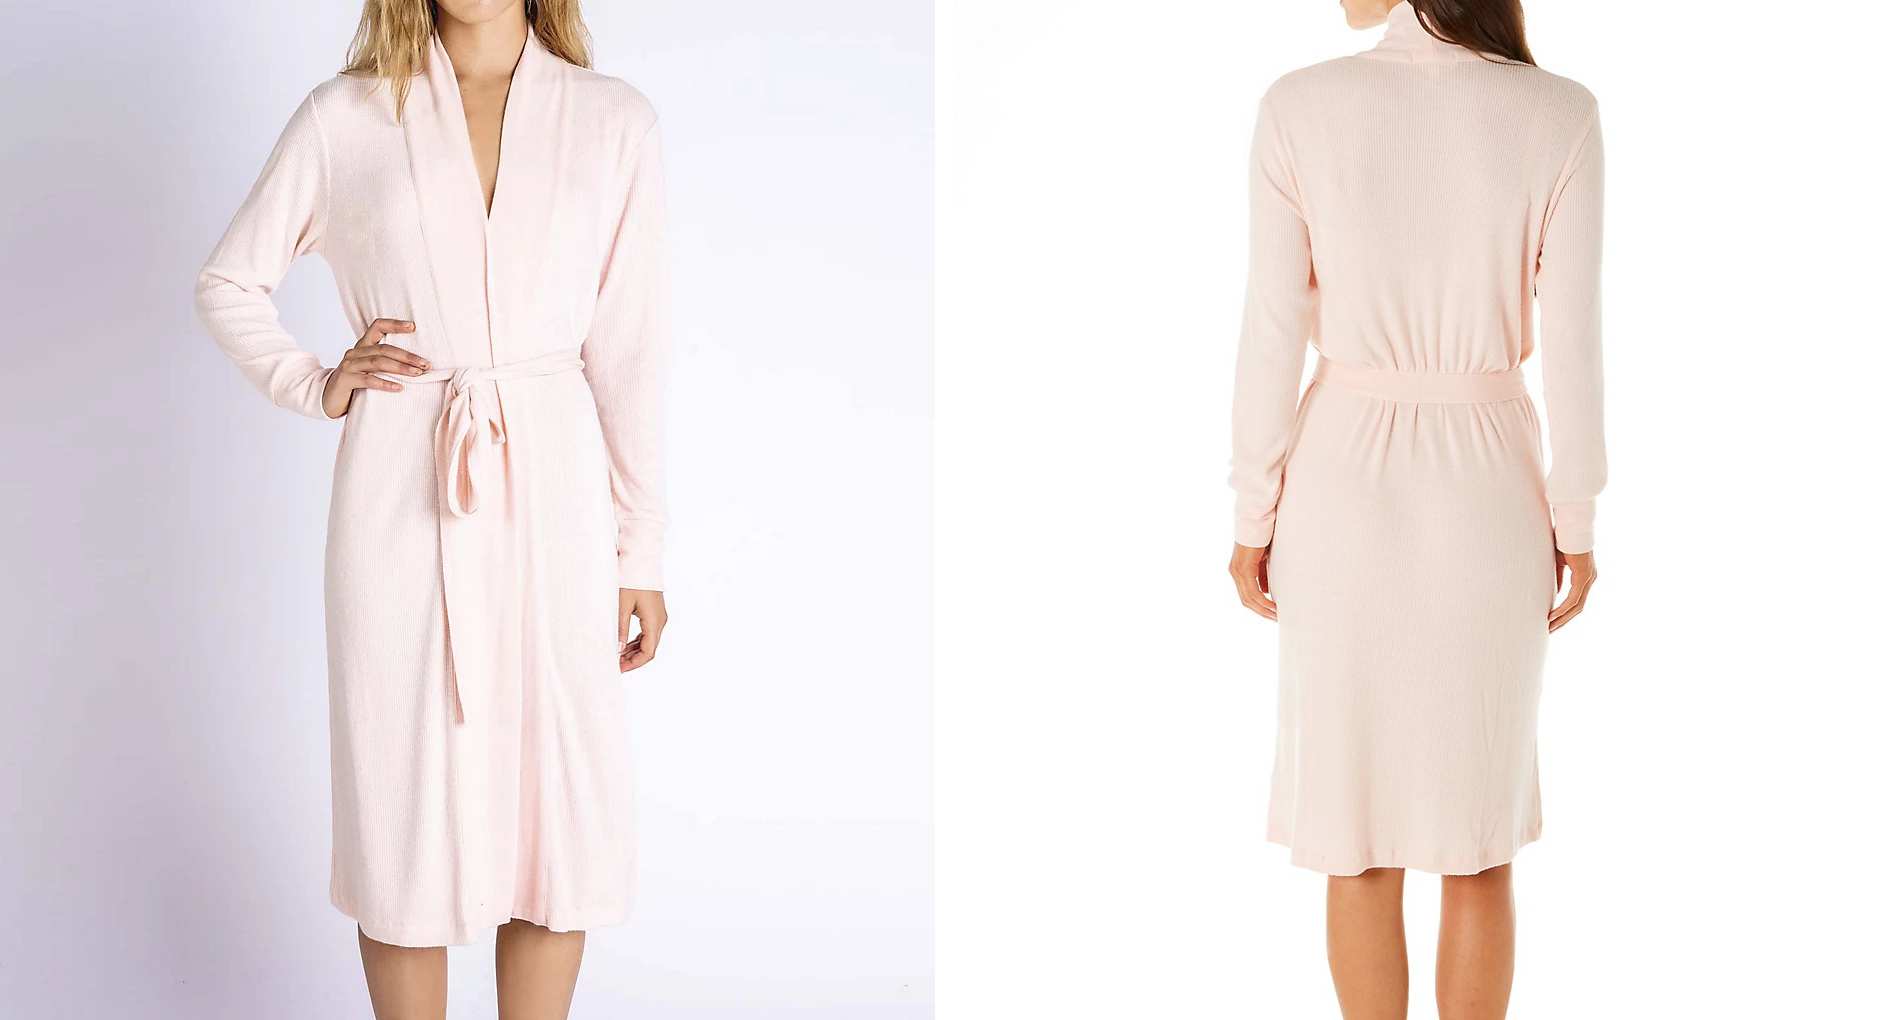 The cotton robe is a timeless favorite!